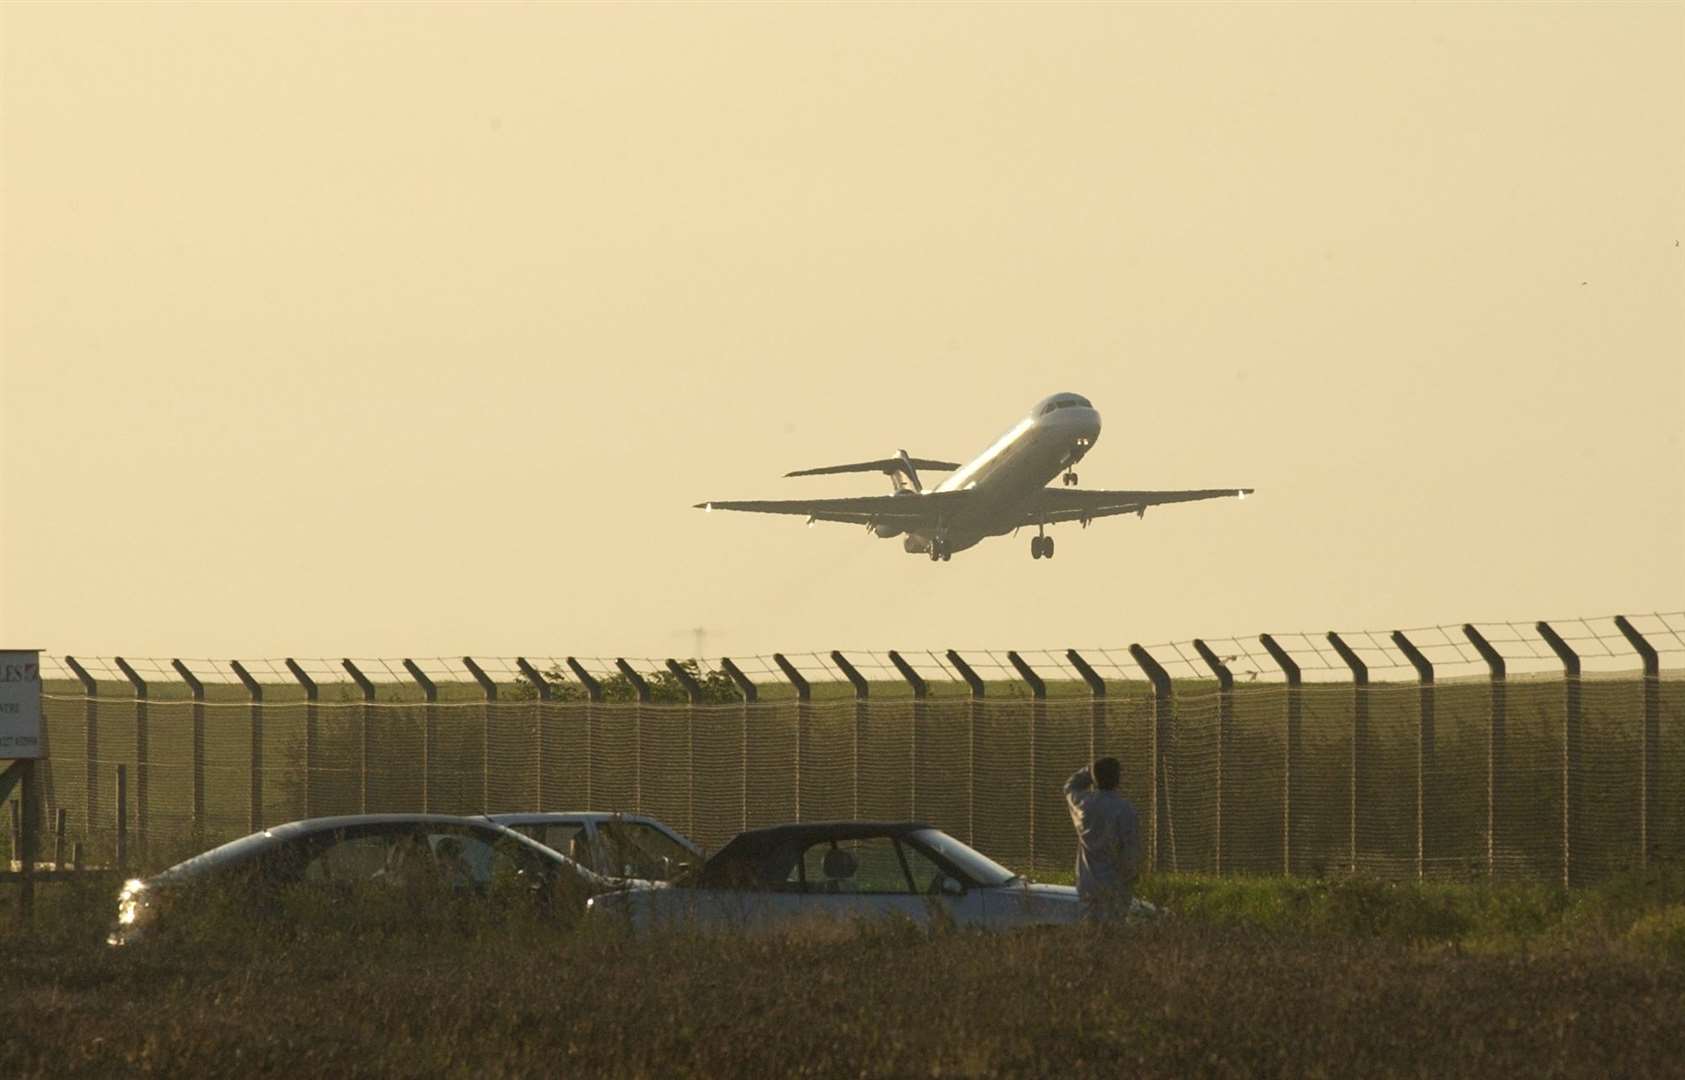 The airport closed in 2014 but has spent recent years battling through the courts to reopen